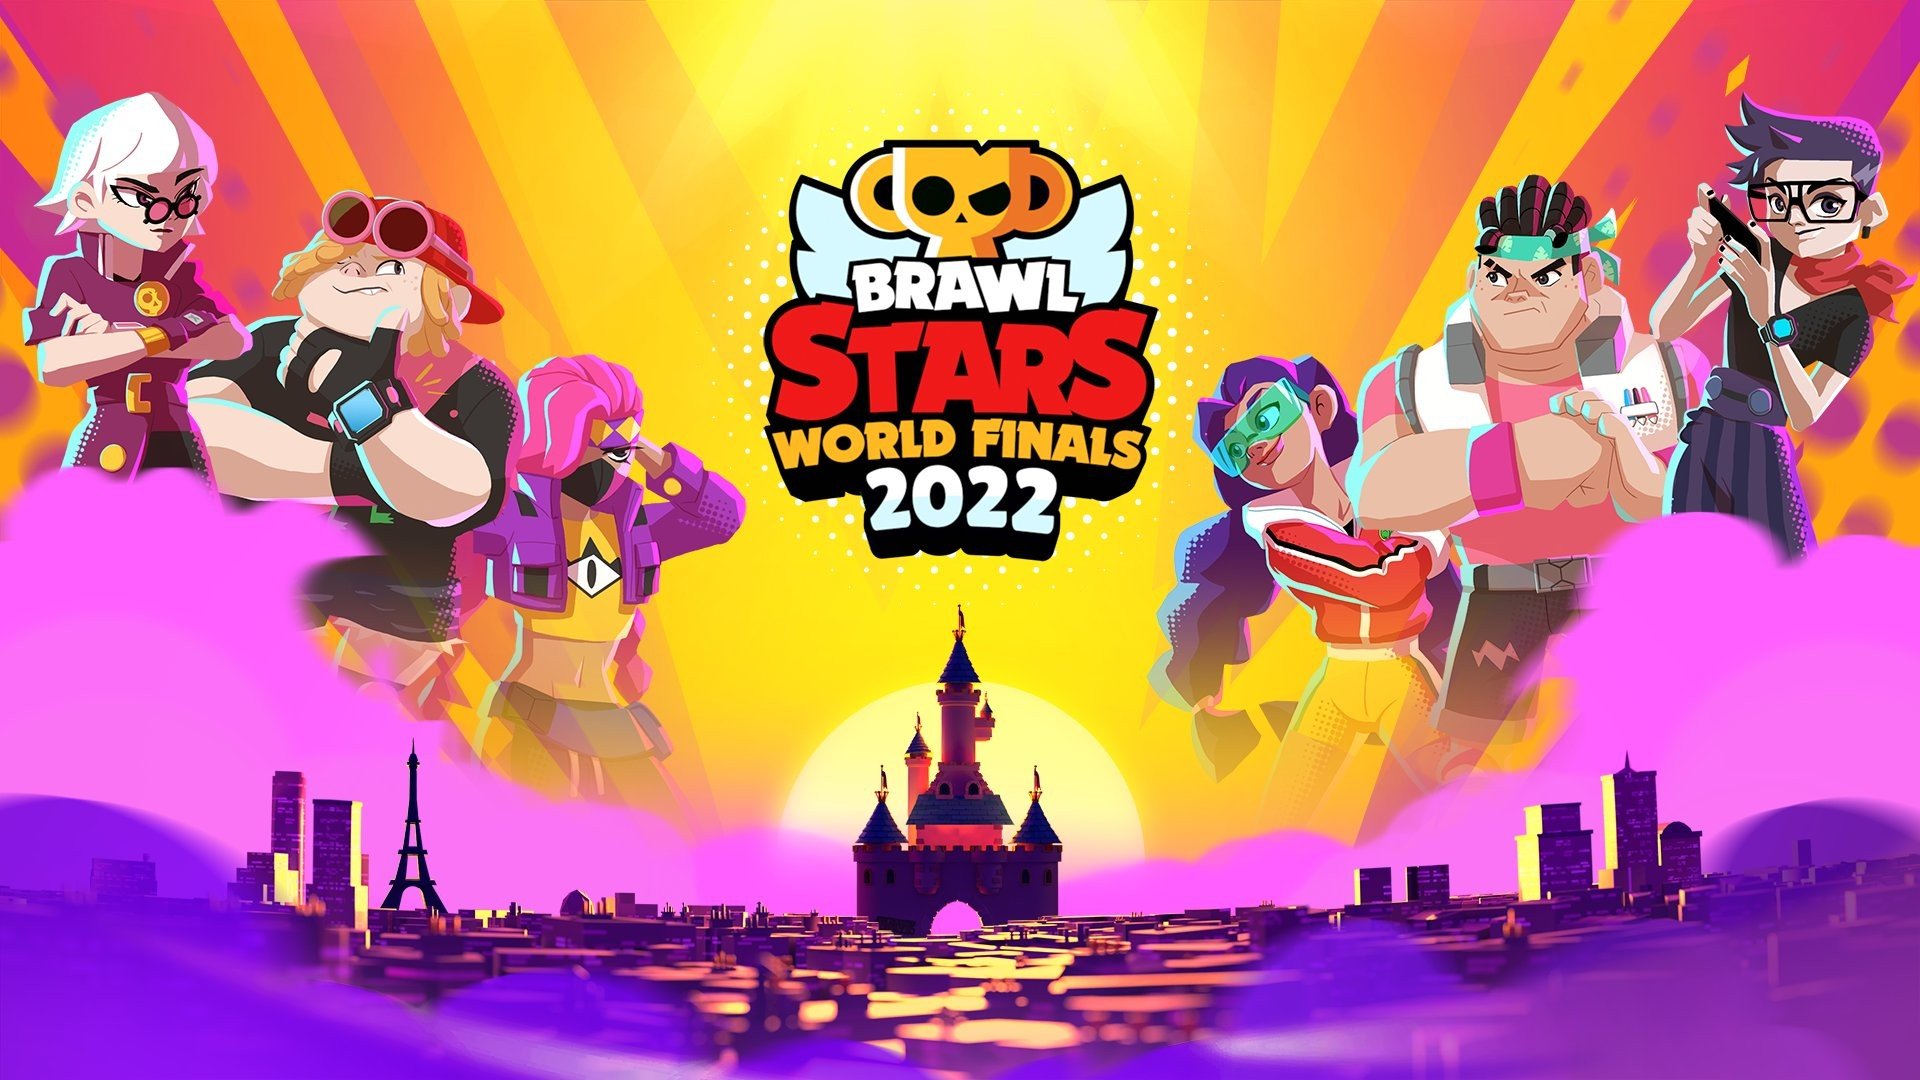 Brawl Stars World Finals are happening on Nov 26-28! Interact with the show  for a chance to earn new pins and the brand new Catburglar Jes…